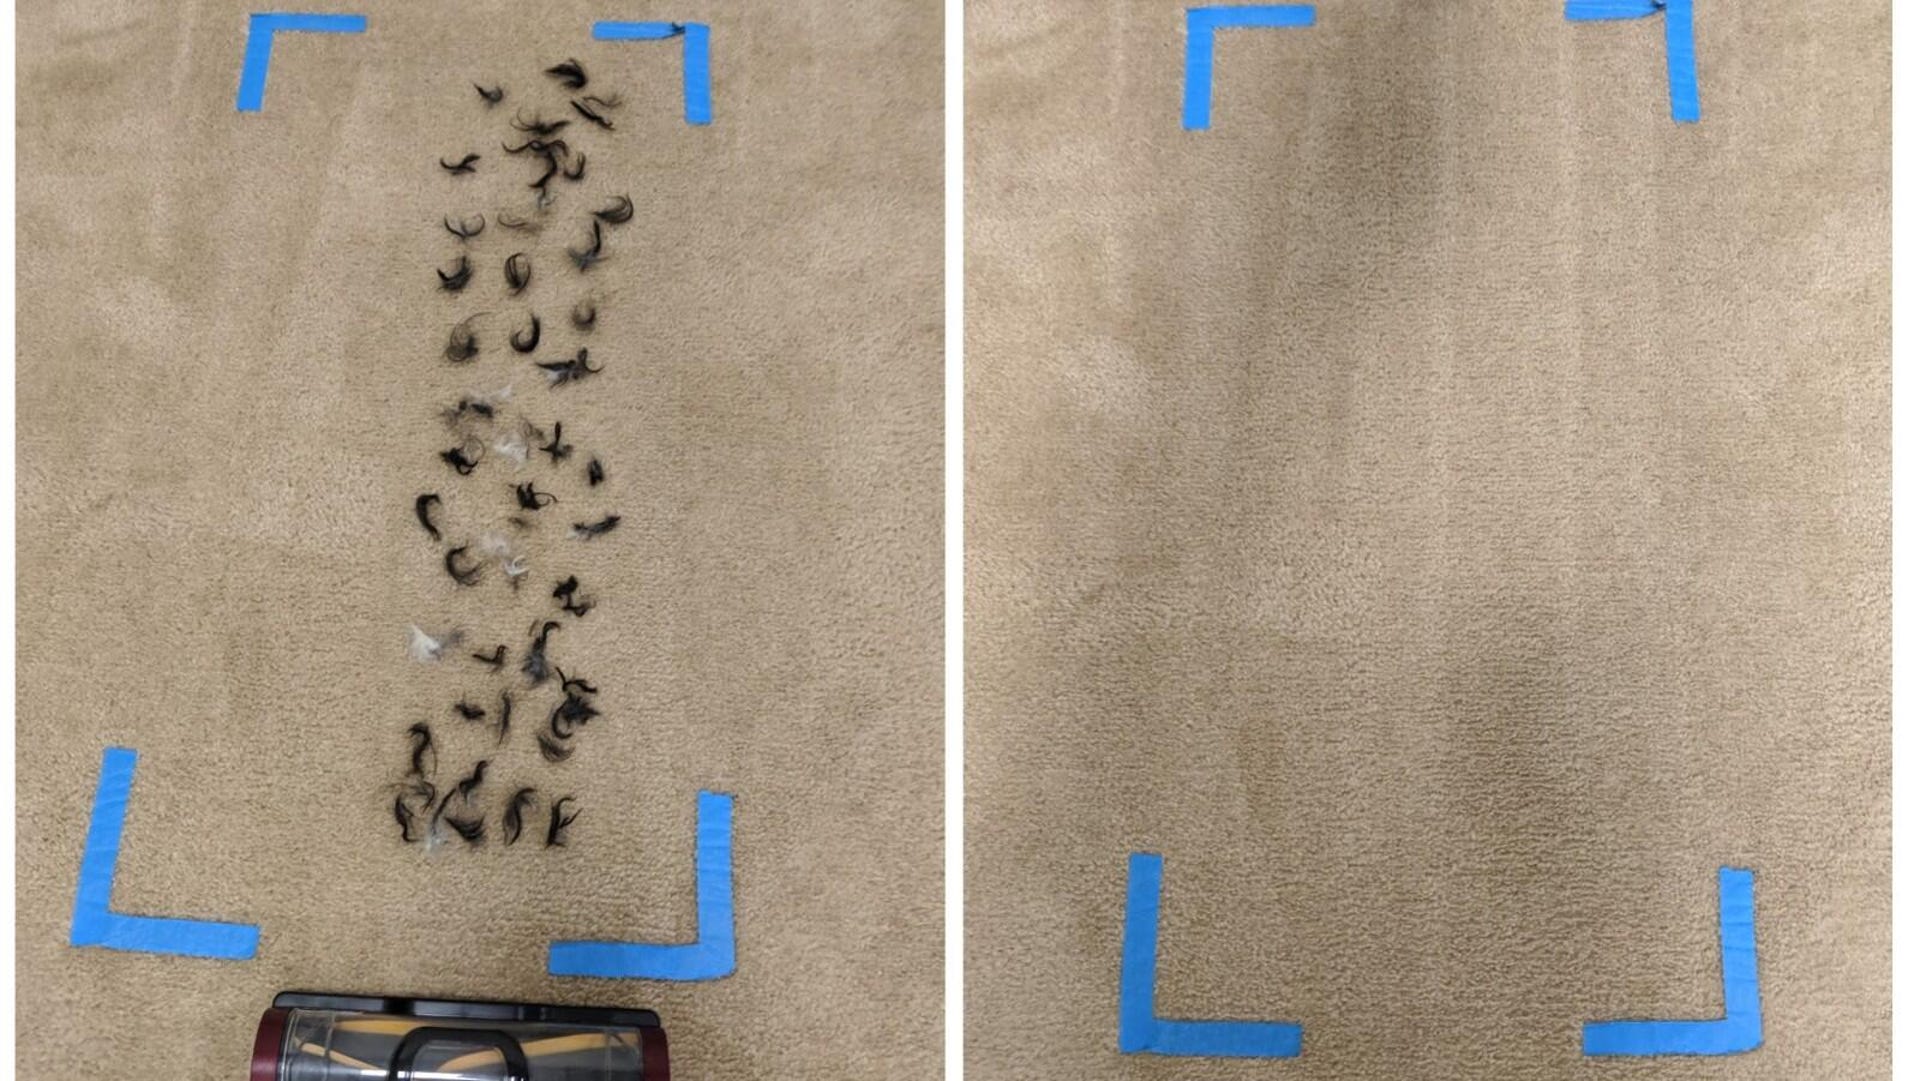 A before and after picture of our floor test.